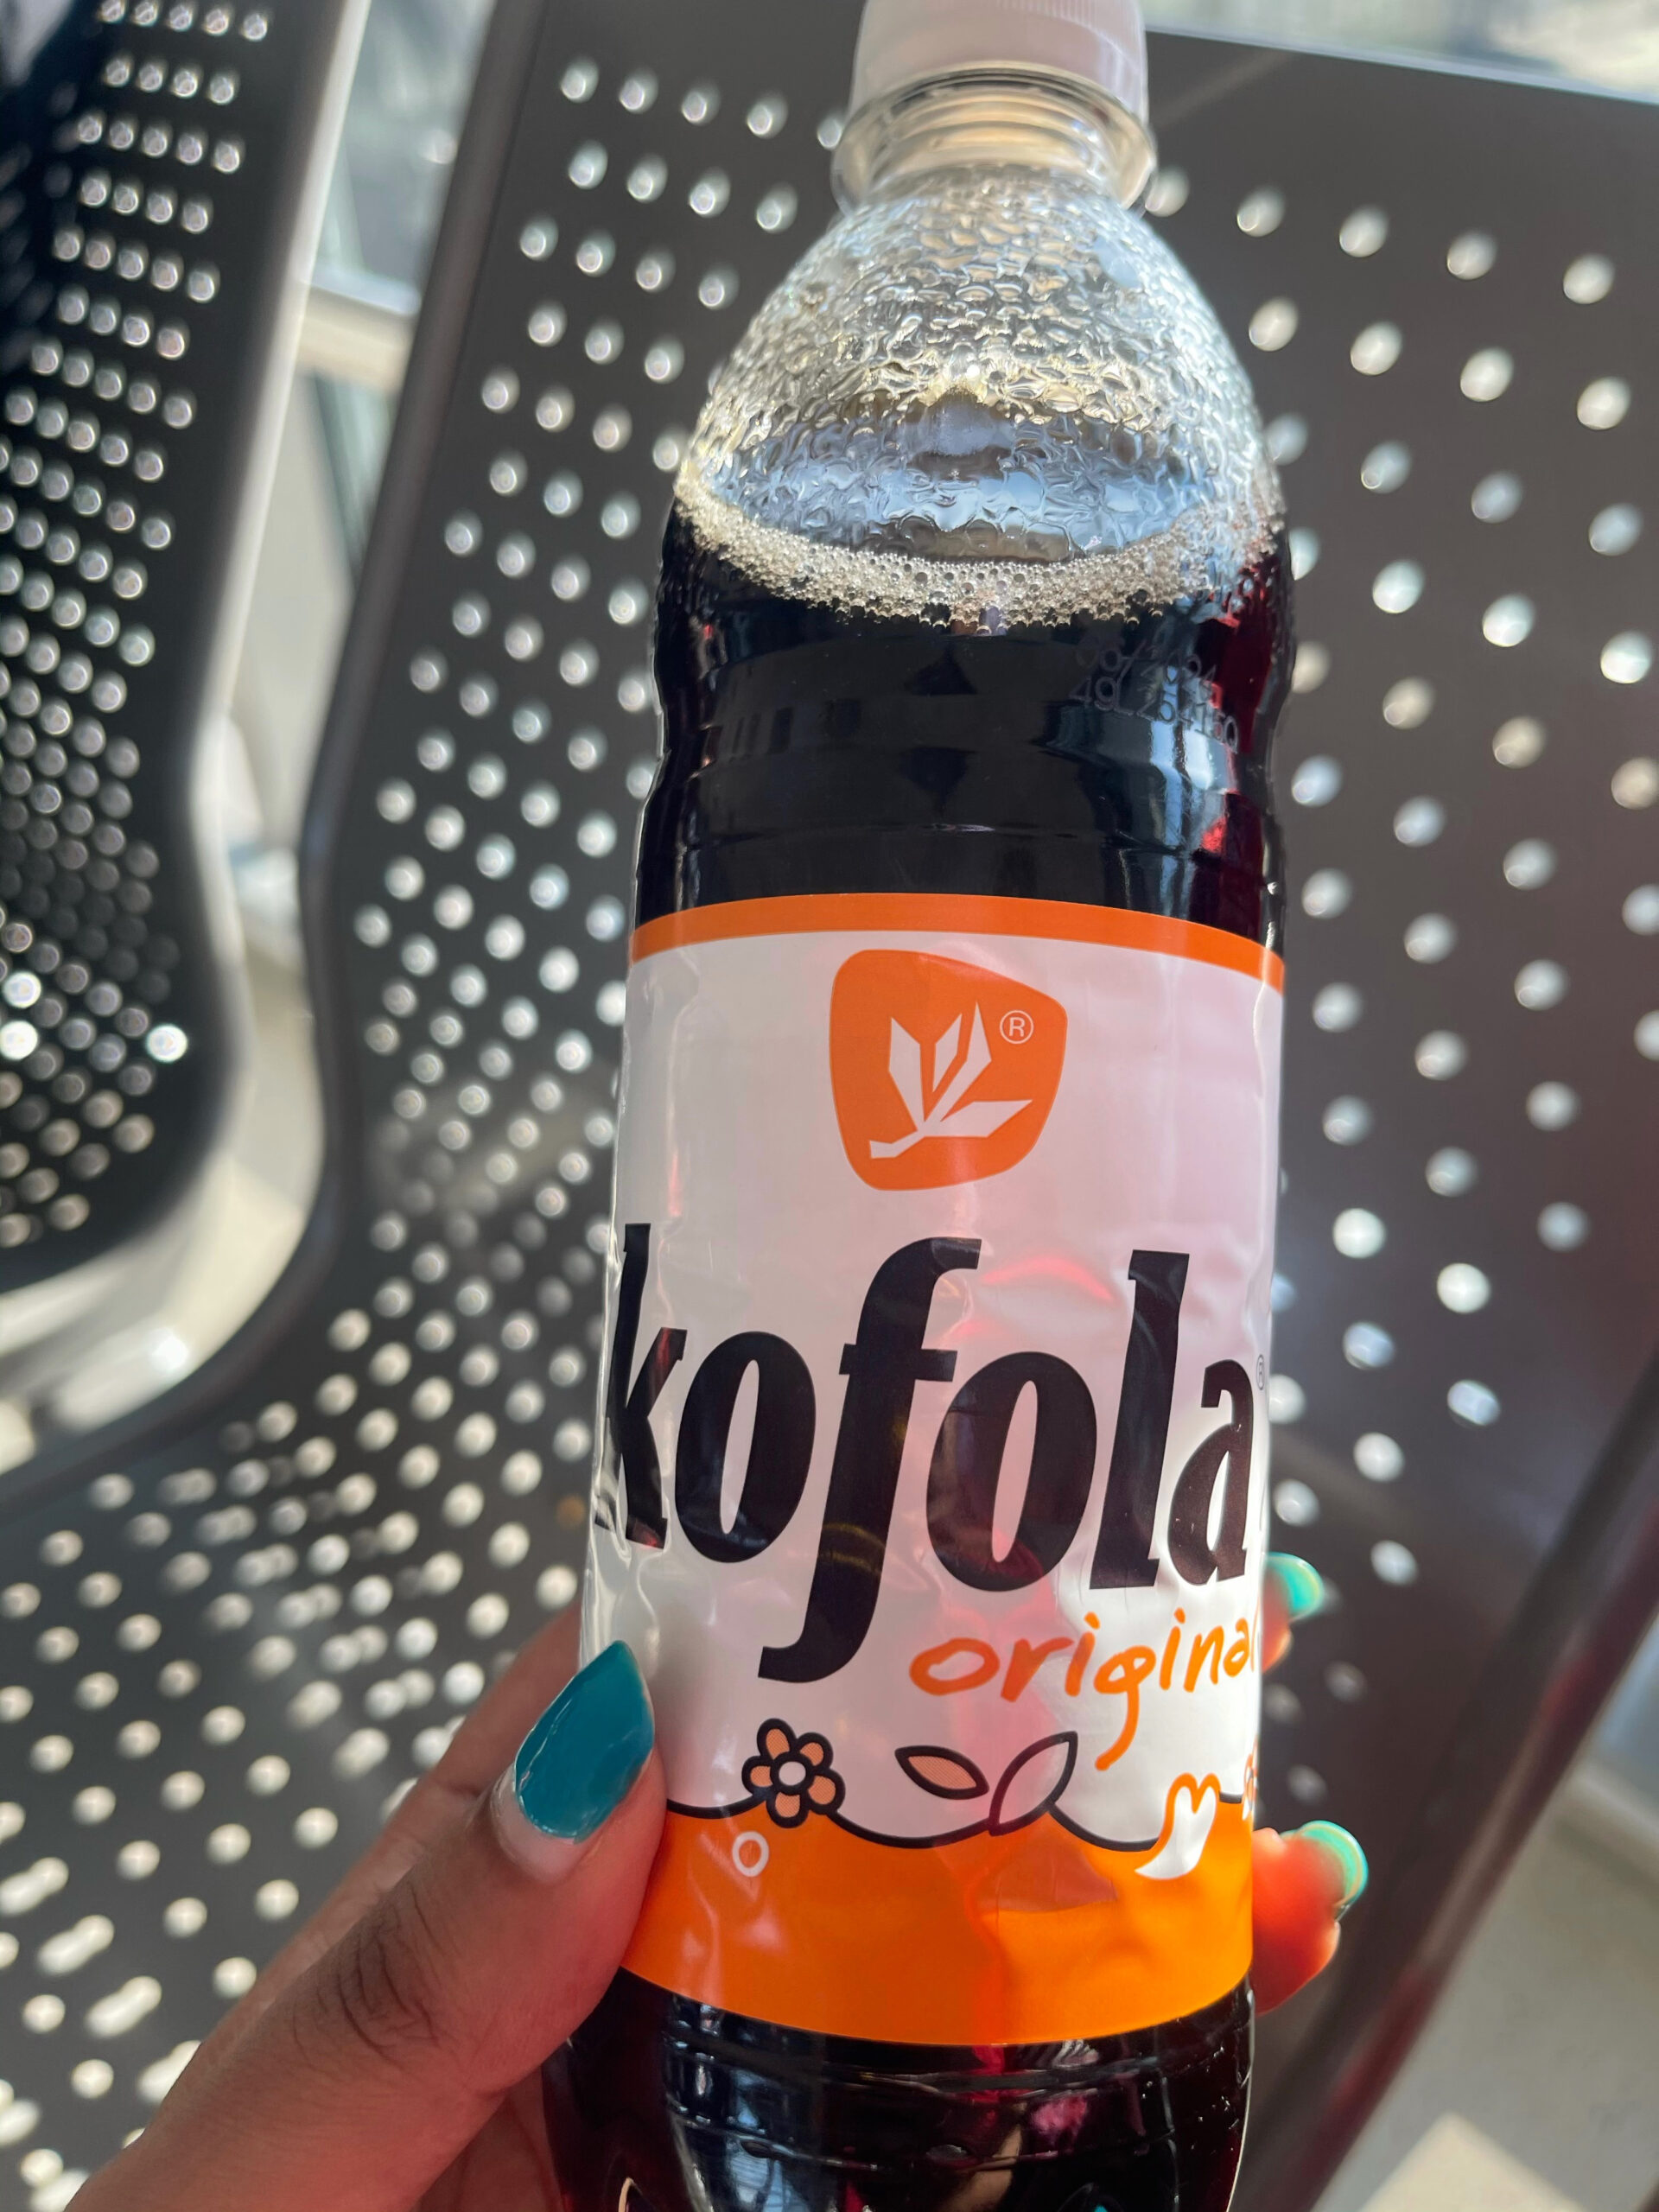 a bottle of kofola it looks like a dark drink the wrapper is white and orange